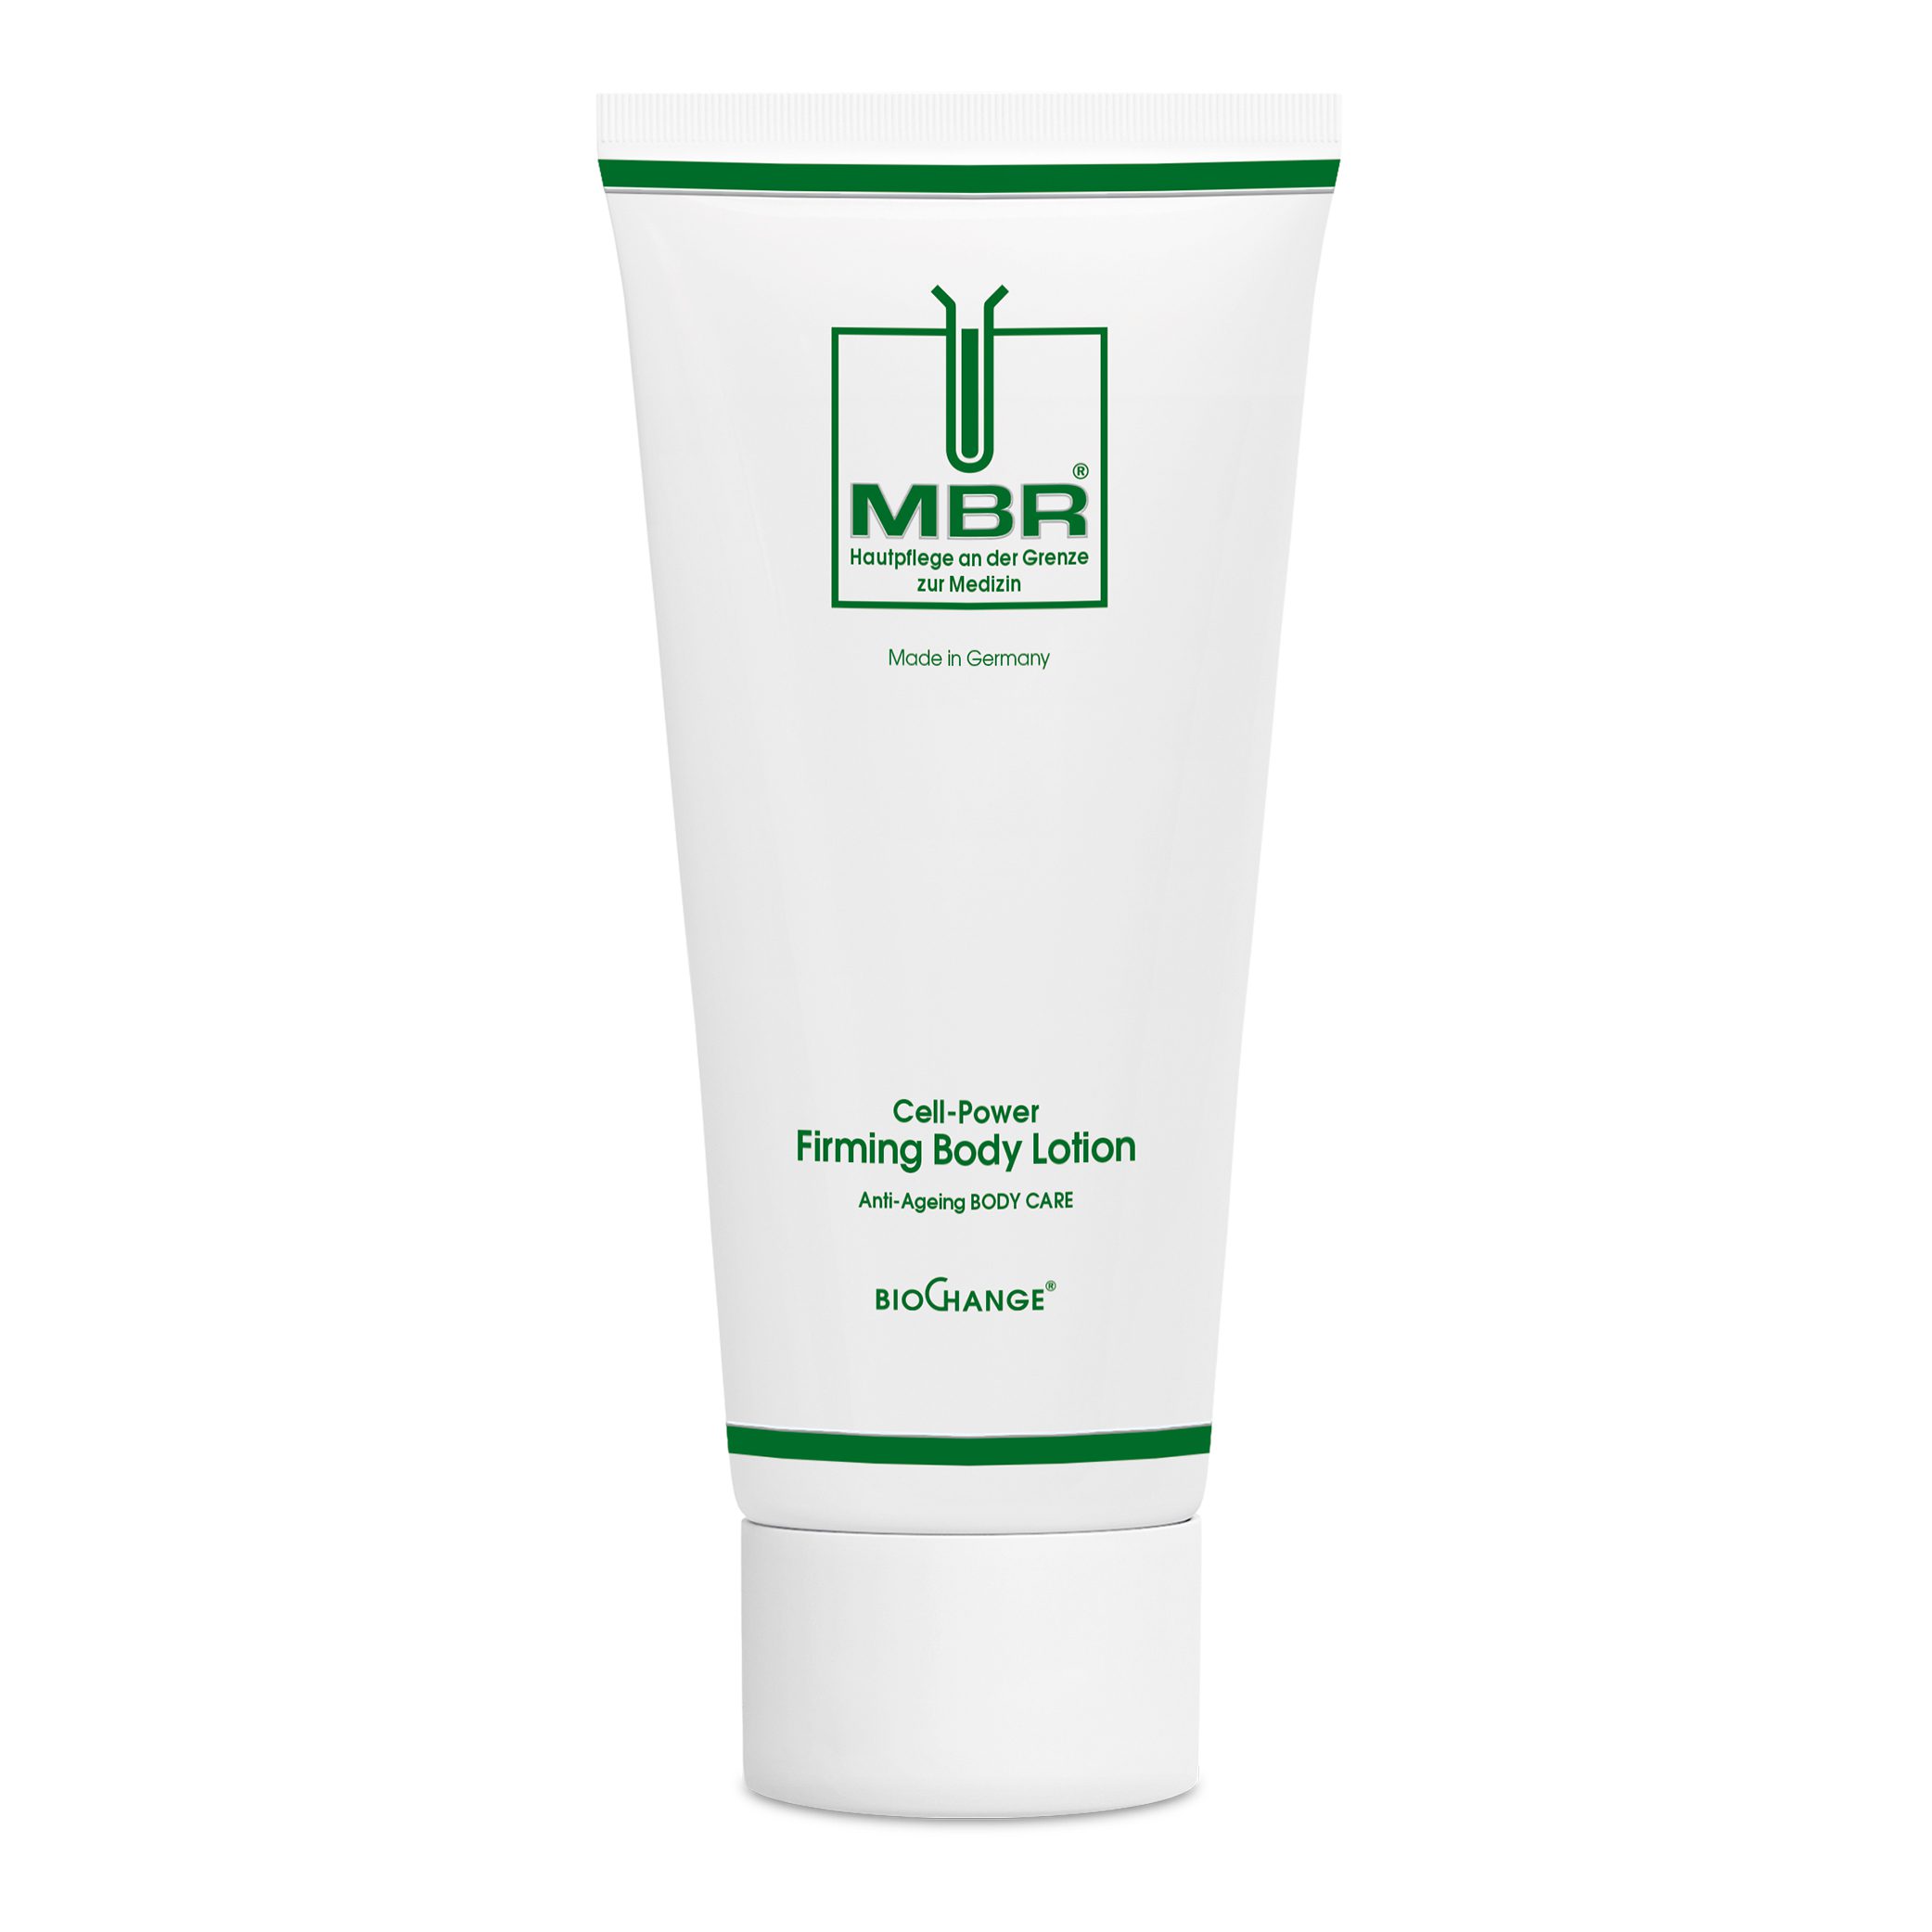 mbr firming body lotion